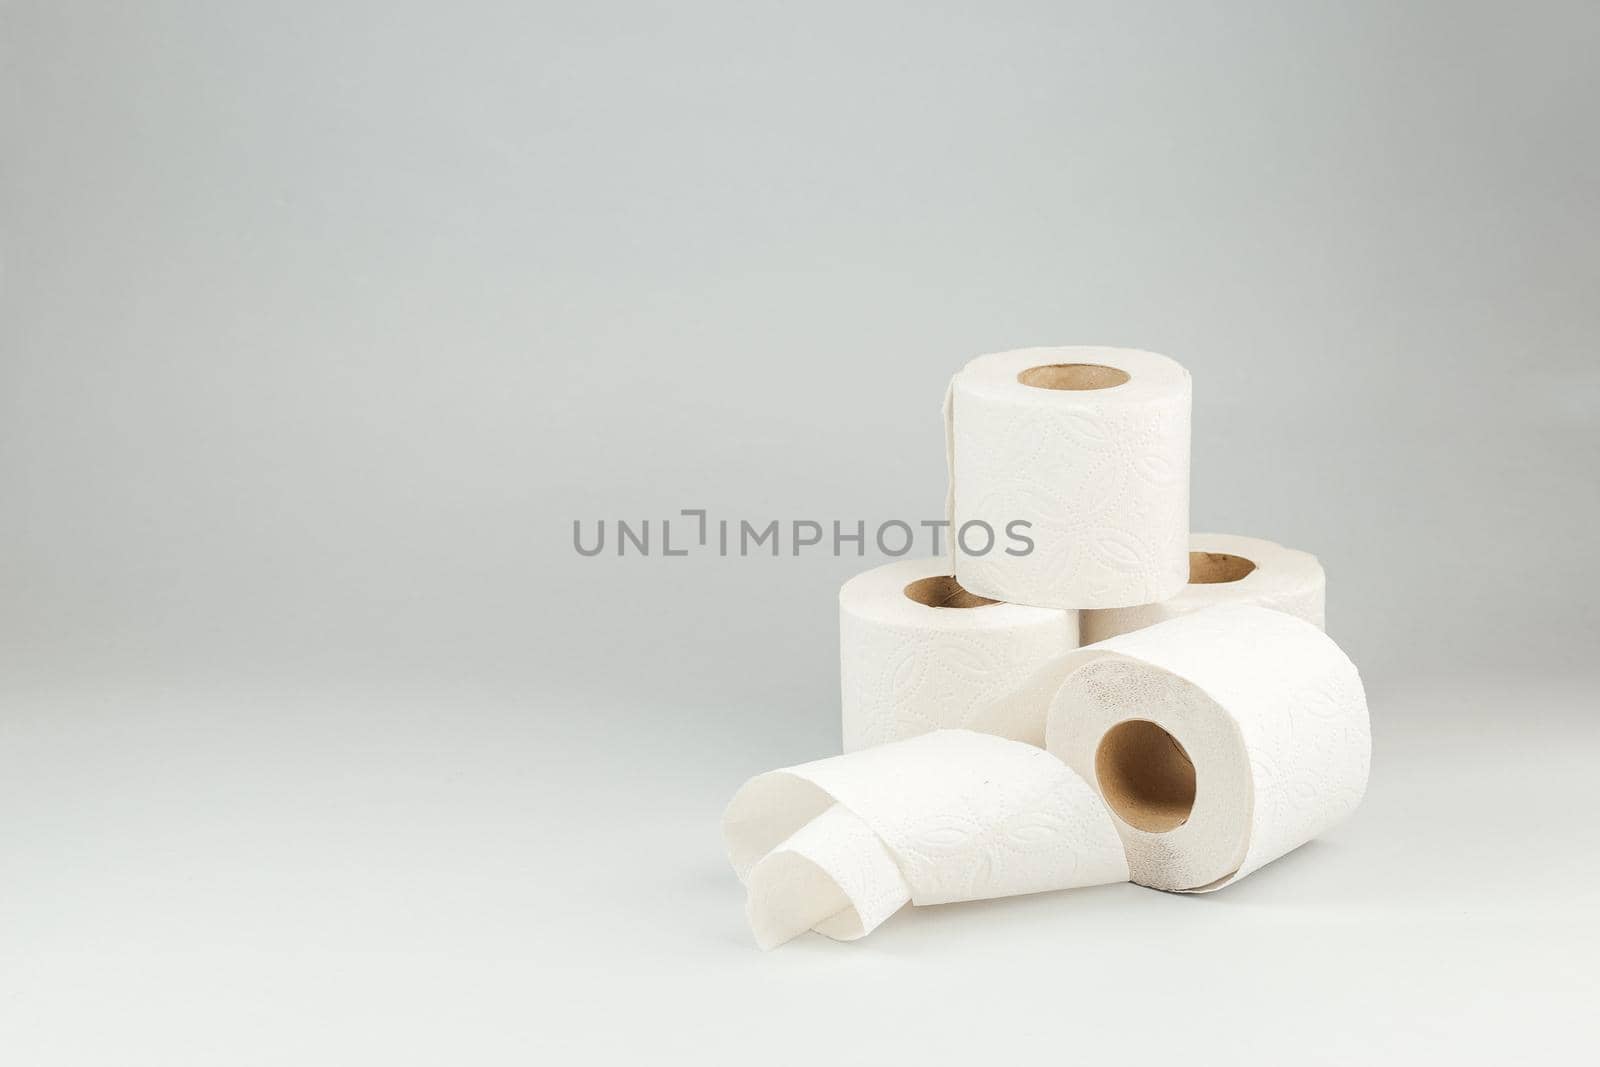 Rolls of Soft Toilet Paper over Gray Background by Syvanych